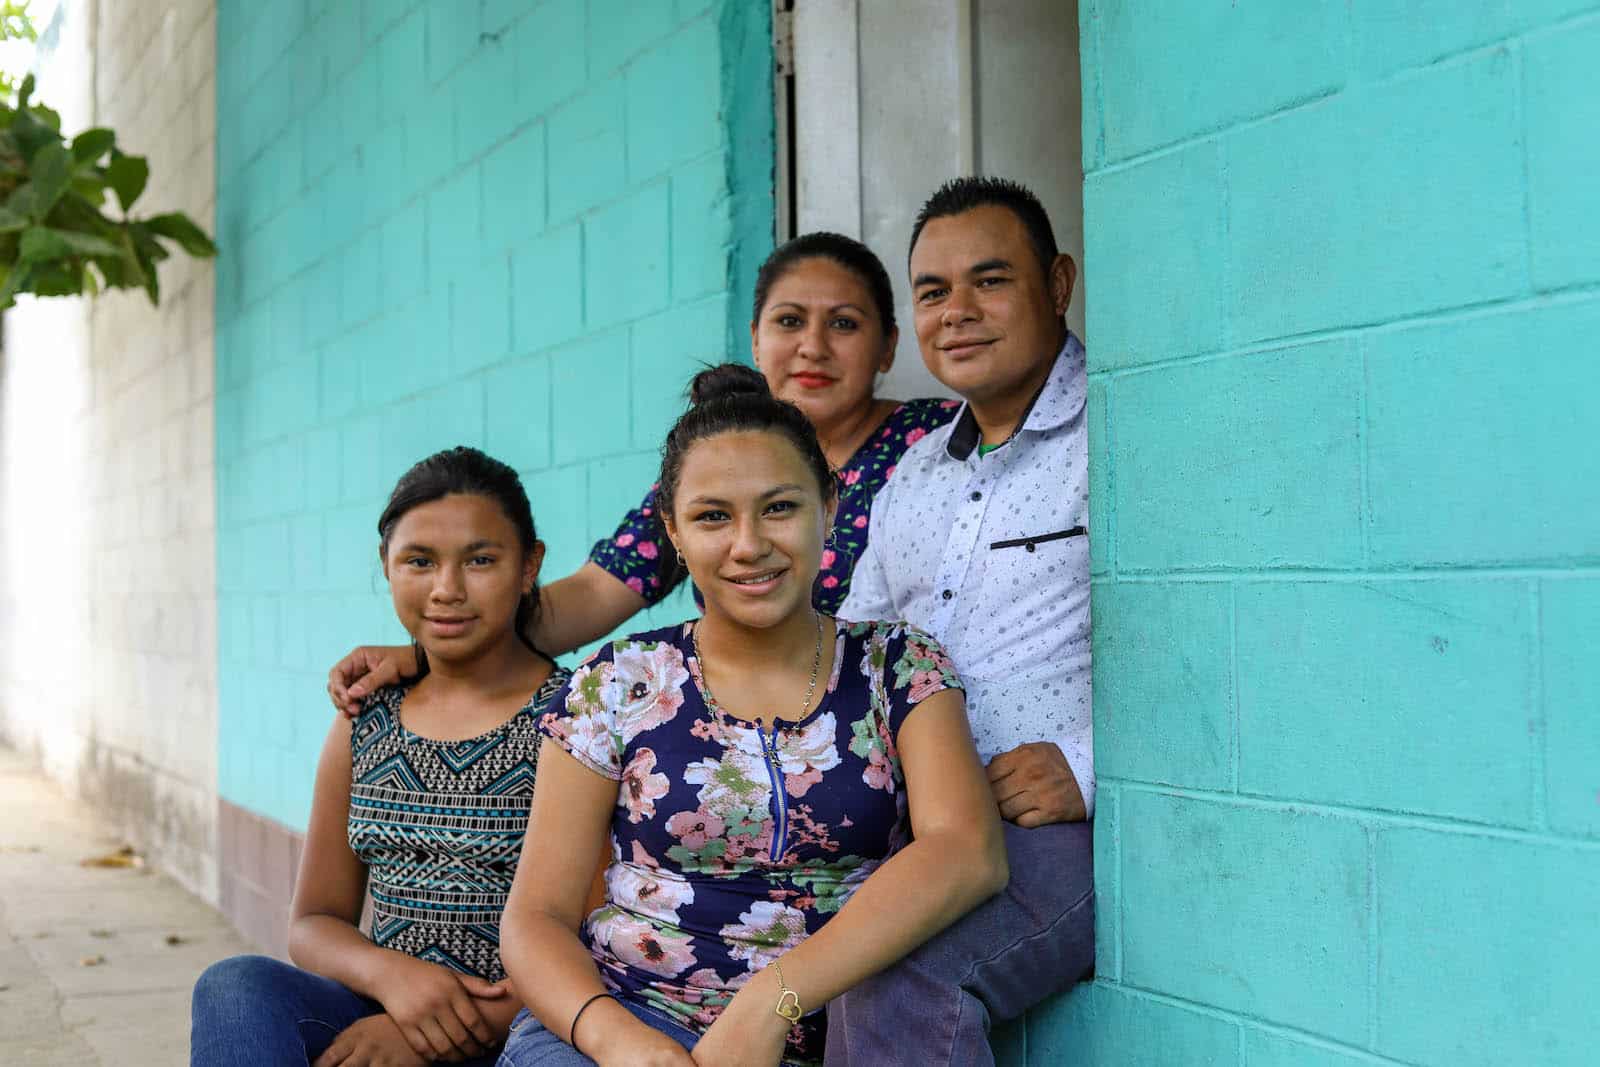 A family of four sits on the doorstep of a turquoise painted home.